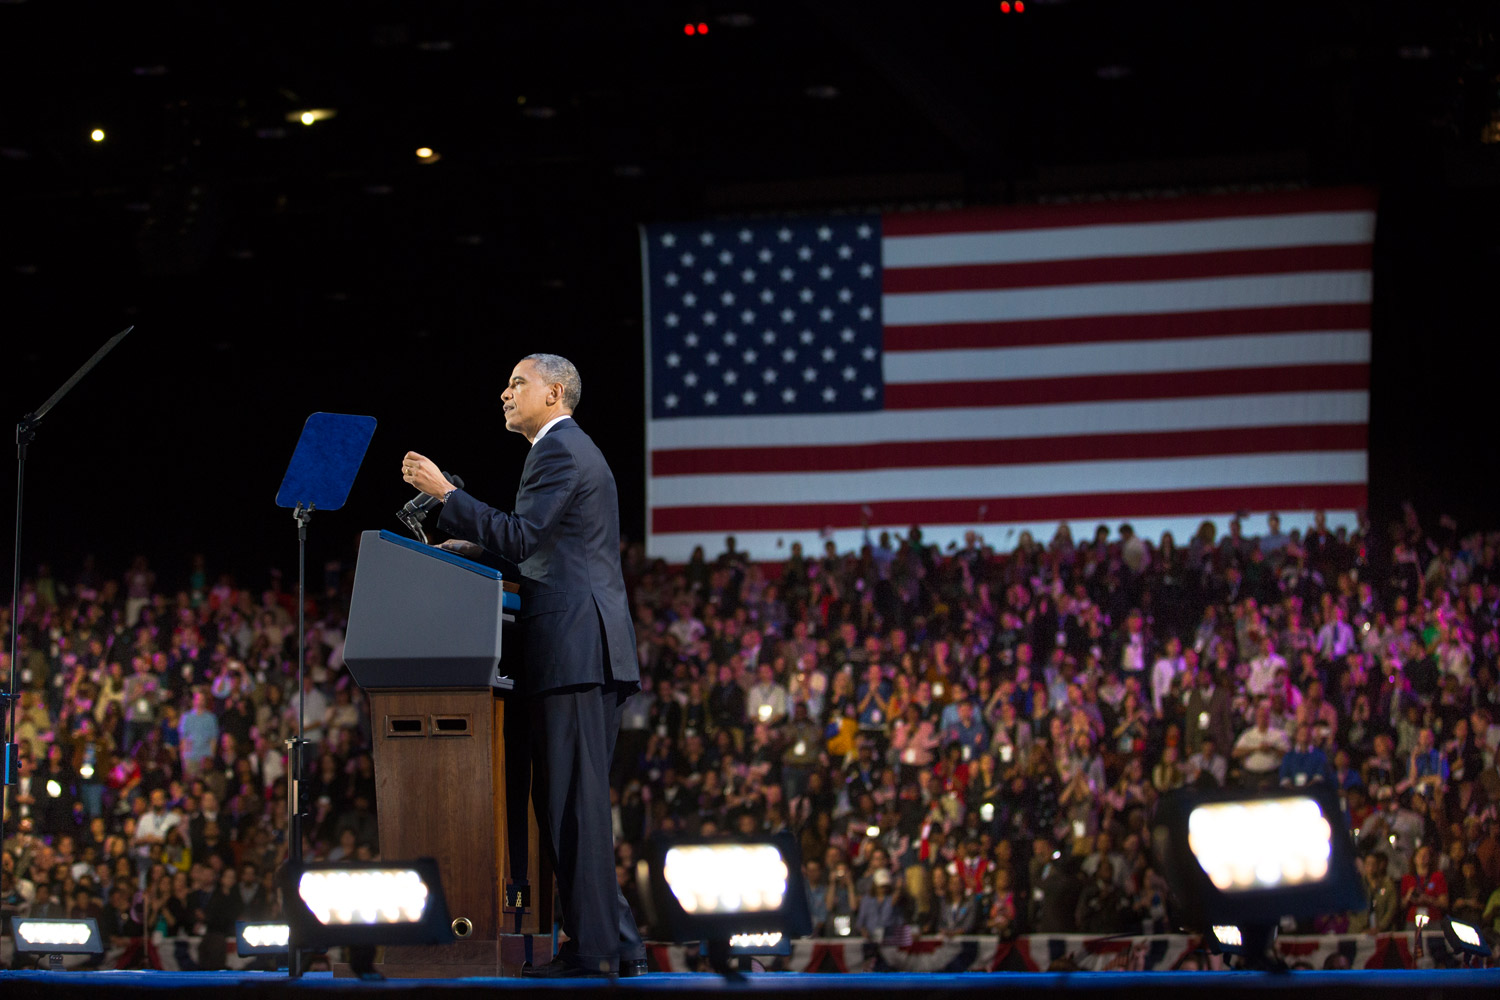 Image: Nov. 6, 2012. President Barack Obama speaks to his supporters at his election night victory party in Chicago.